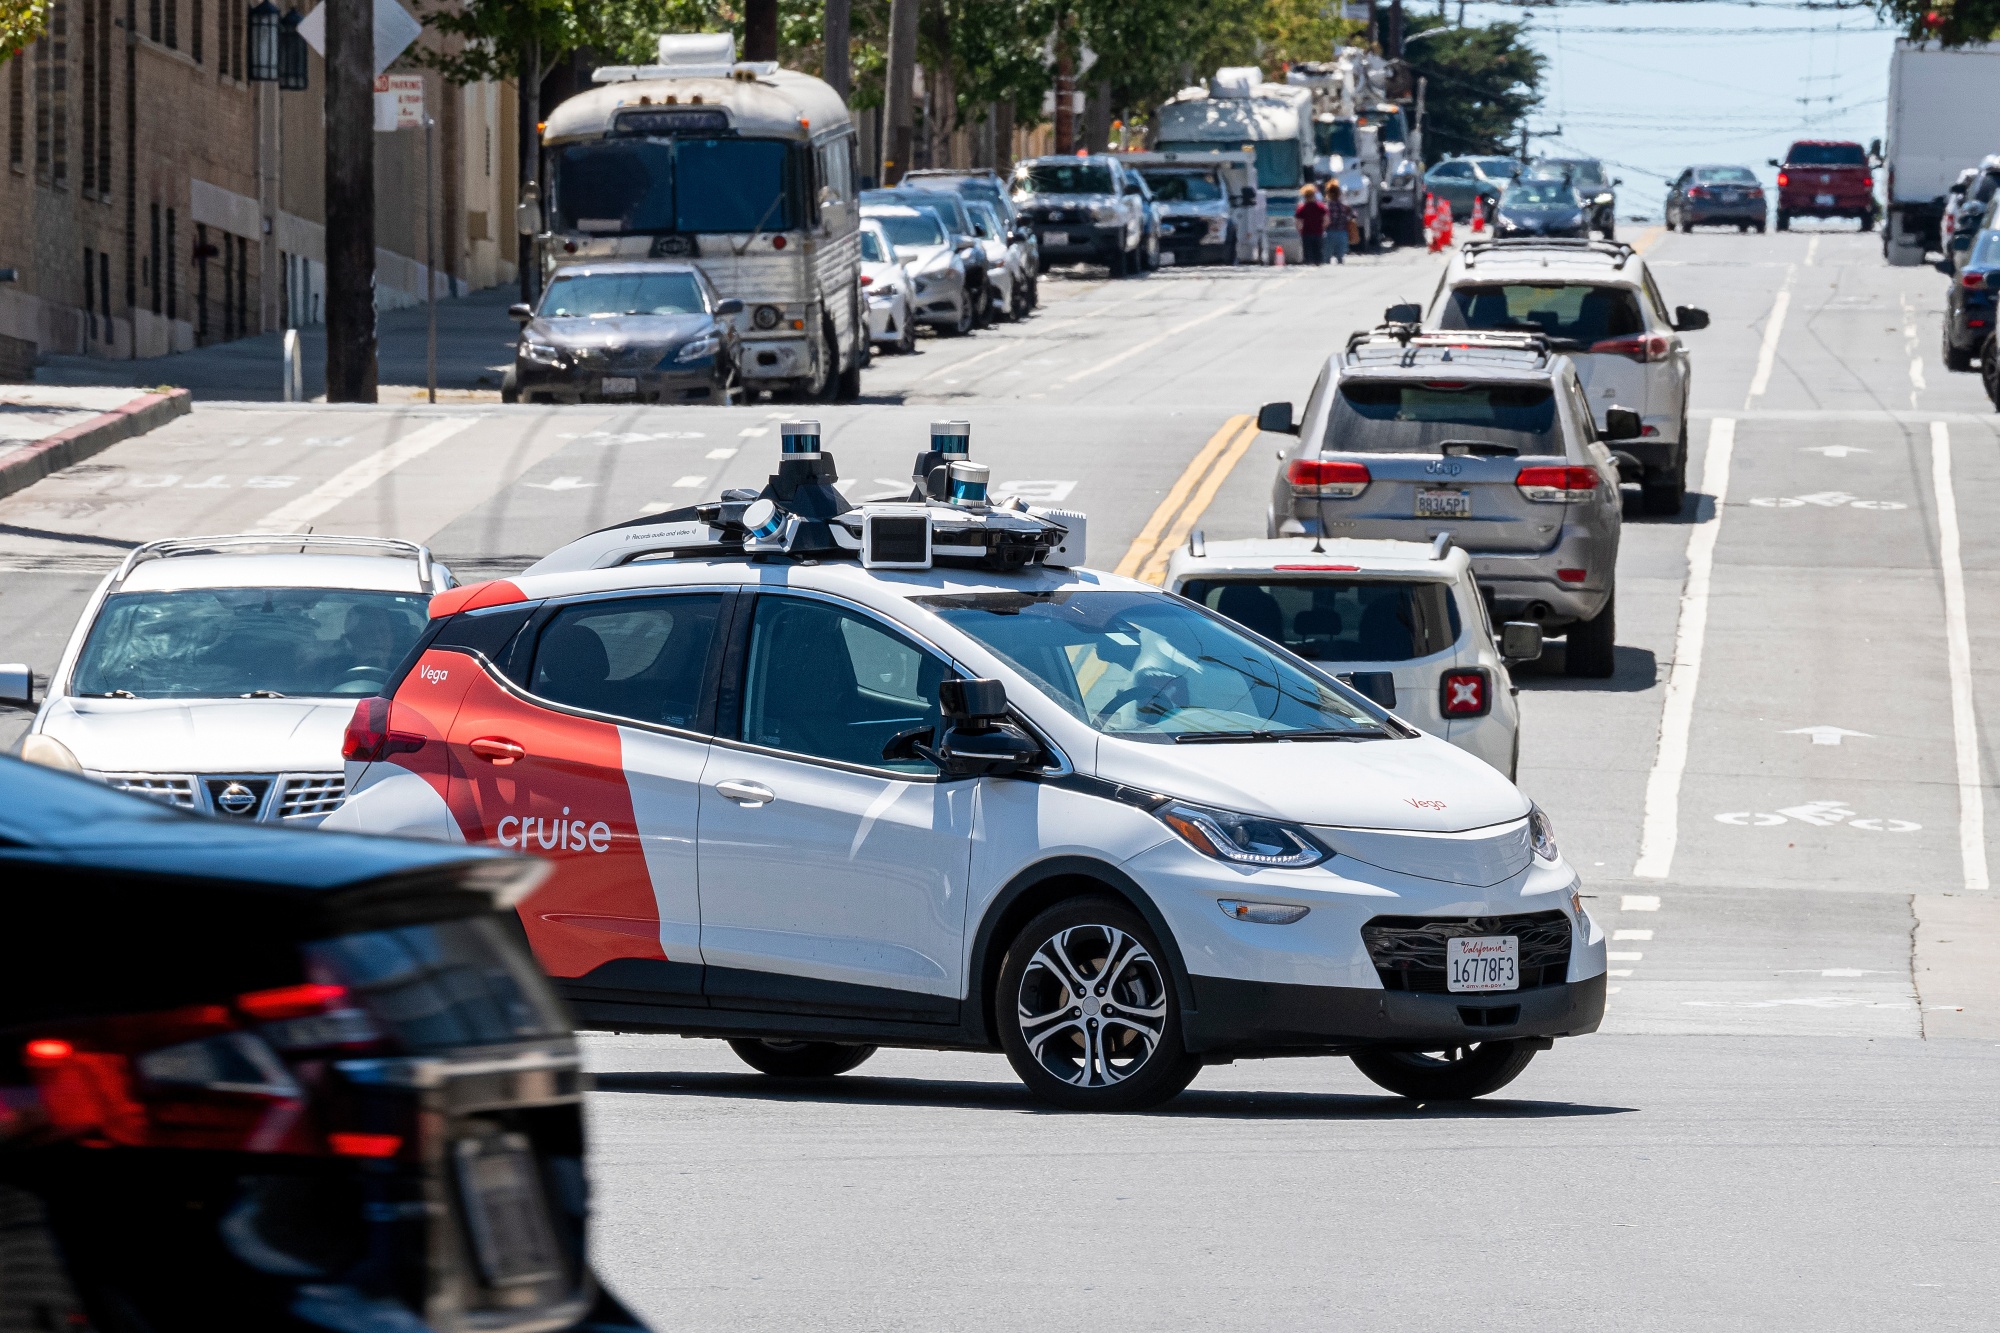 GM’s Cruise has compensated a San Francisco pedestrian who was struck and dragged by its autonomous taxi with over $8 million